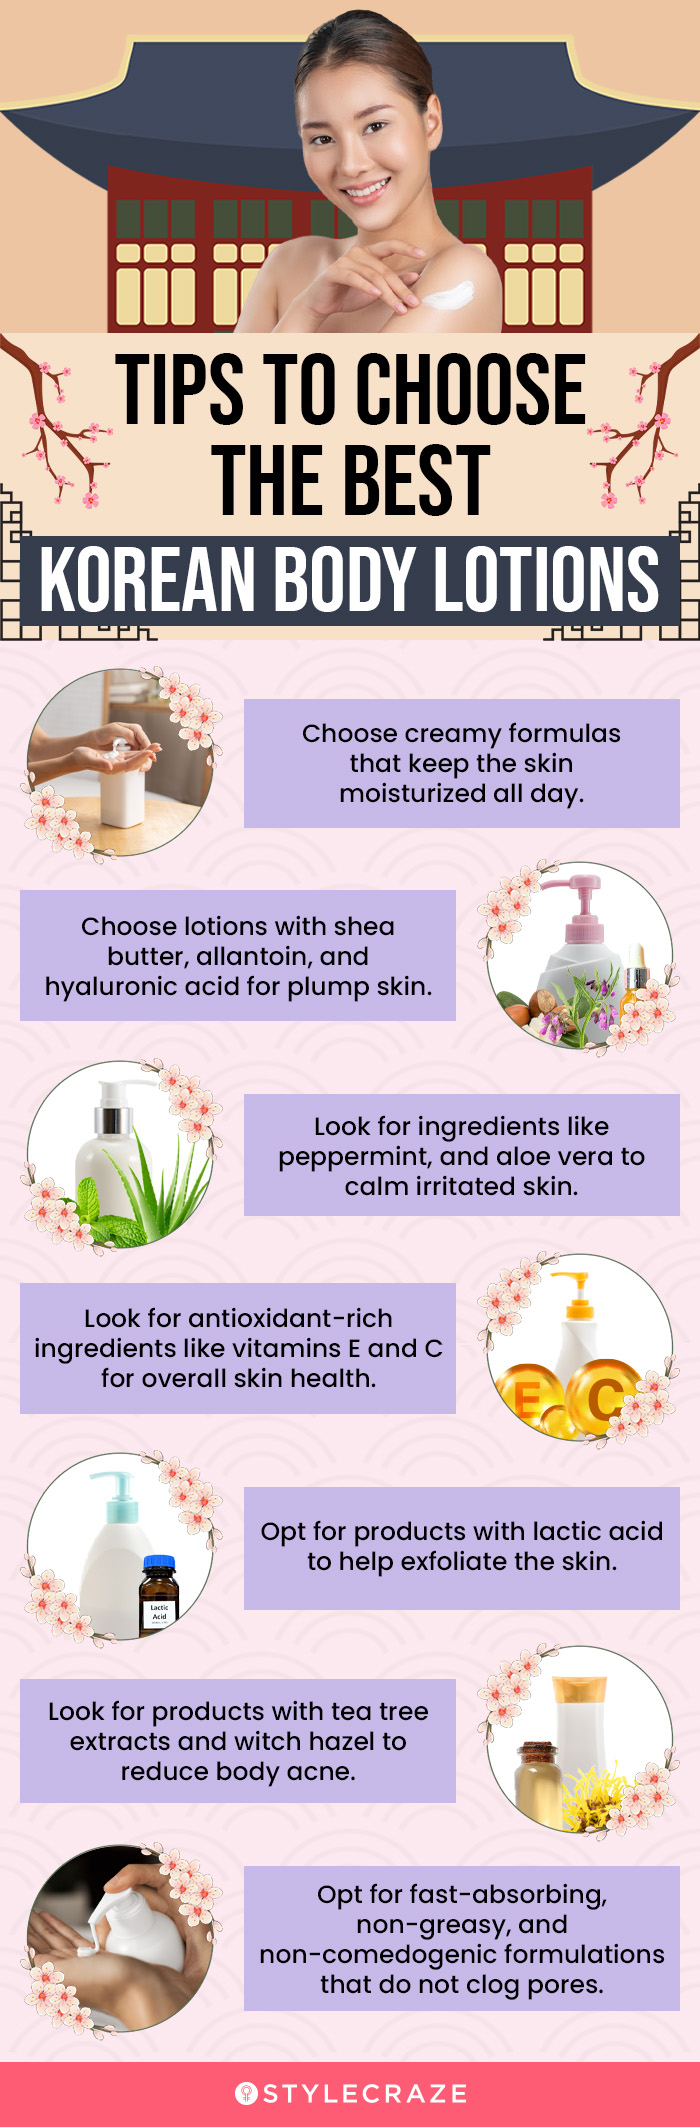 Tips To Choose The Best Korean Body Lotions (infographic)